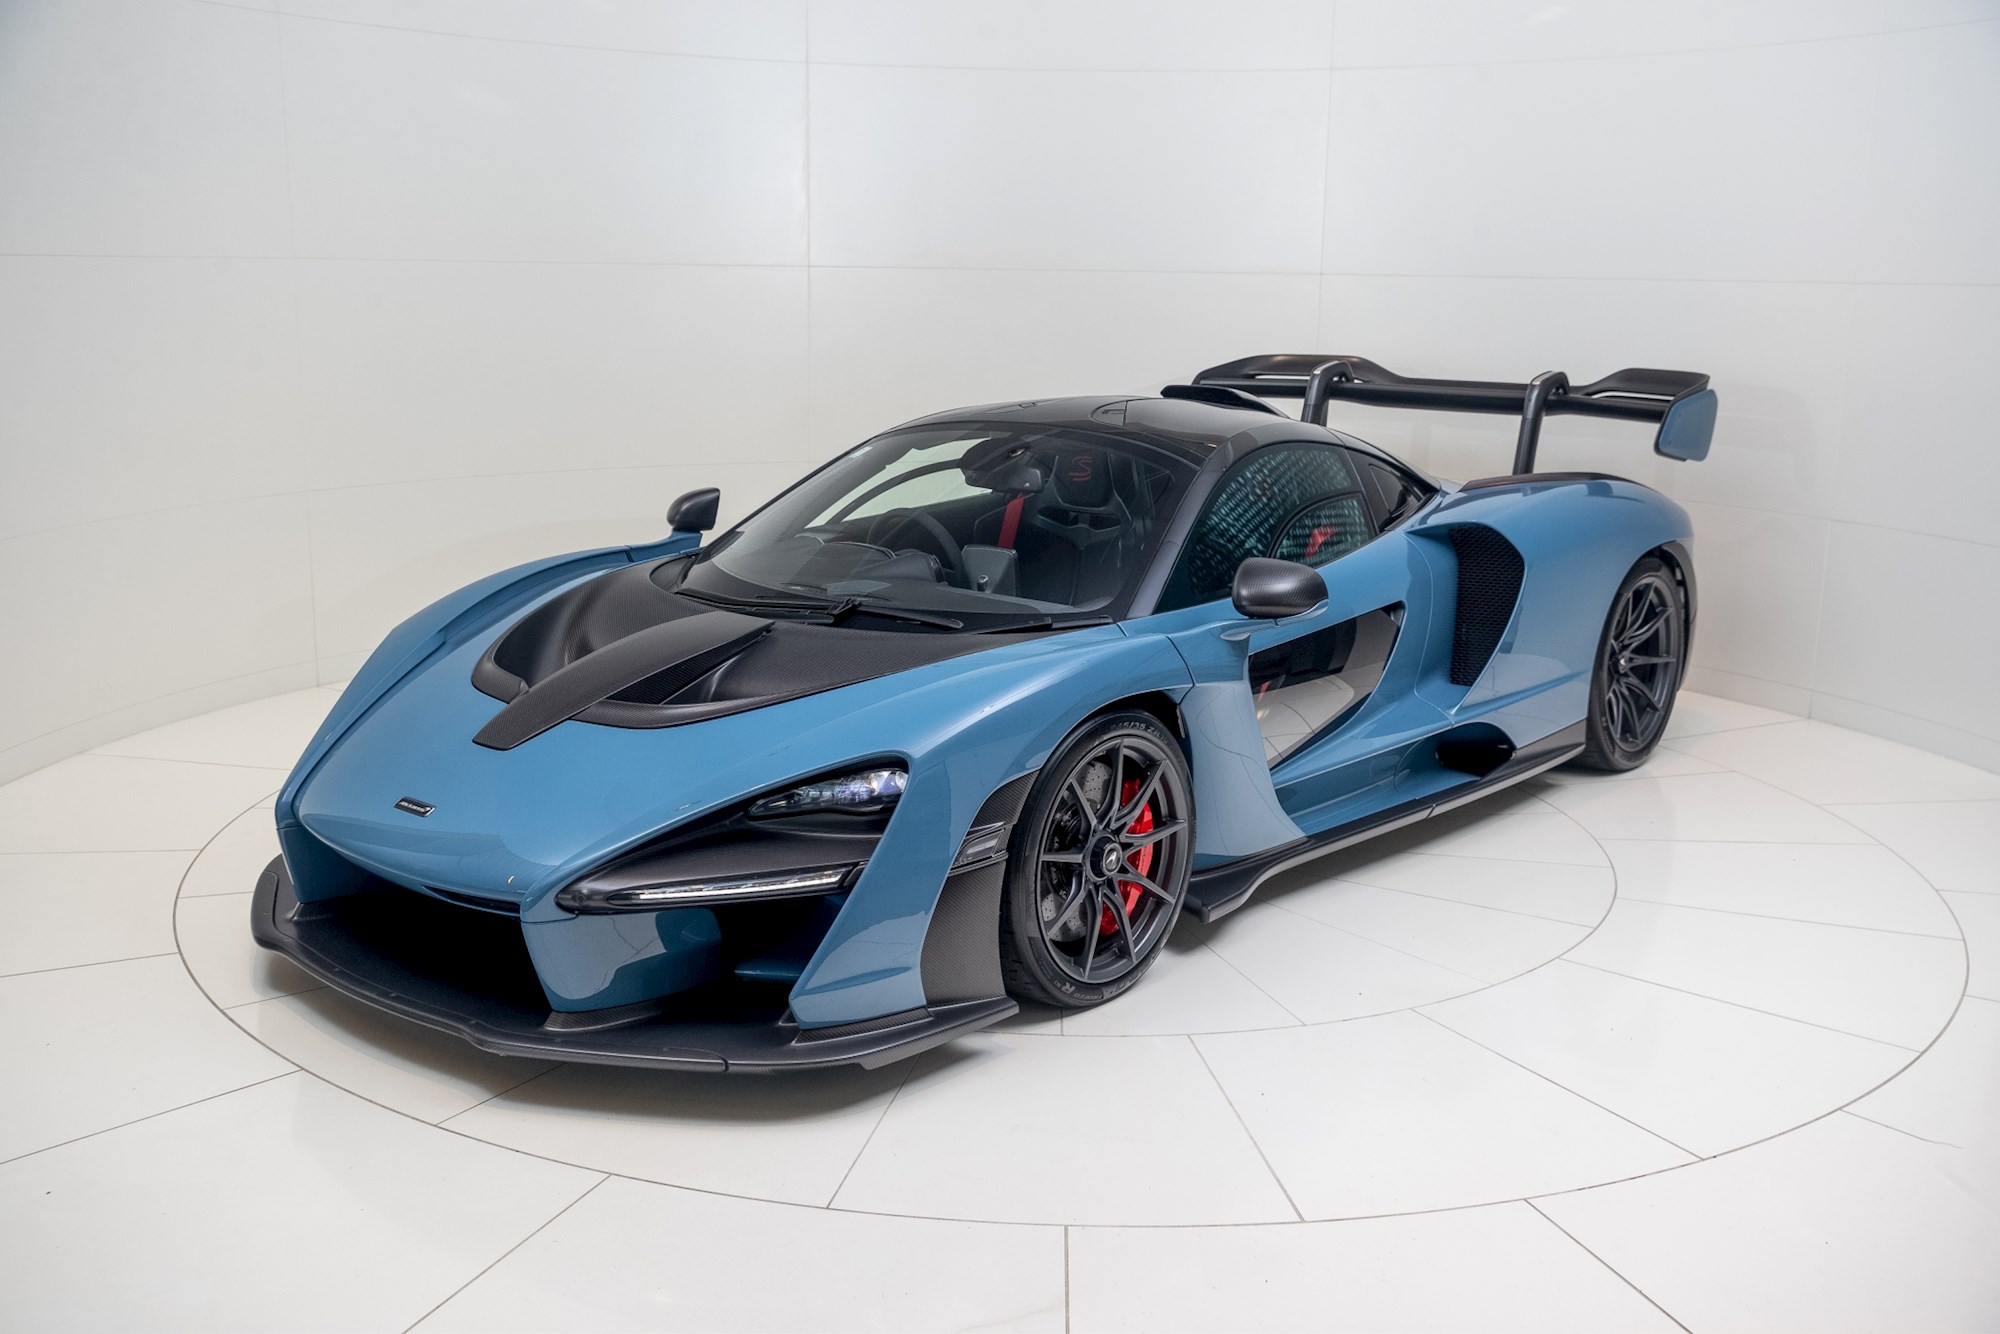 This is not a drill: $1.8m McLaren Senna hypercar up for sale in NZ